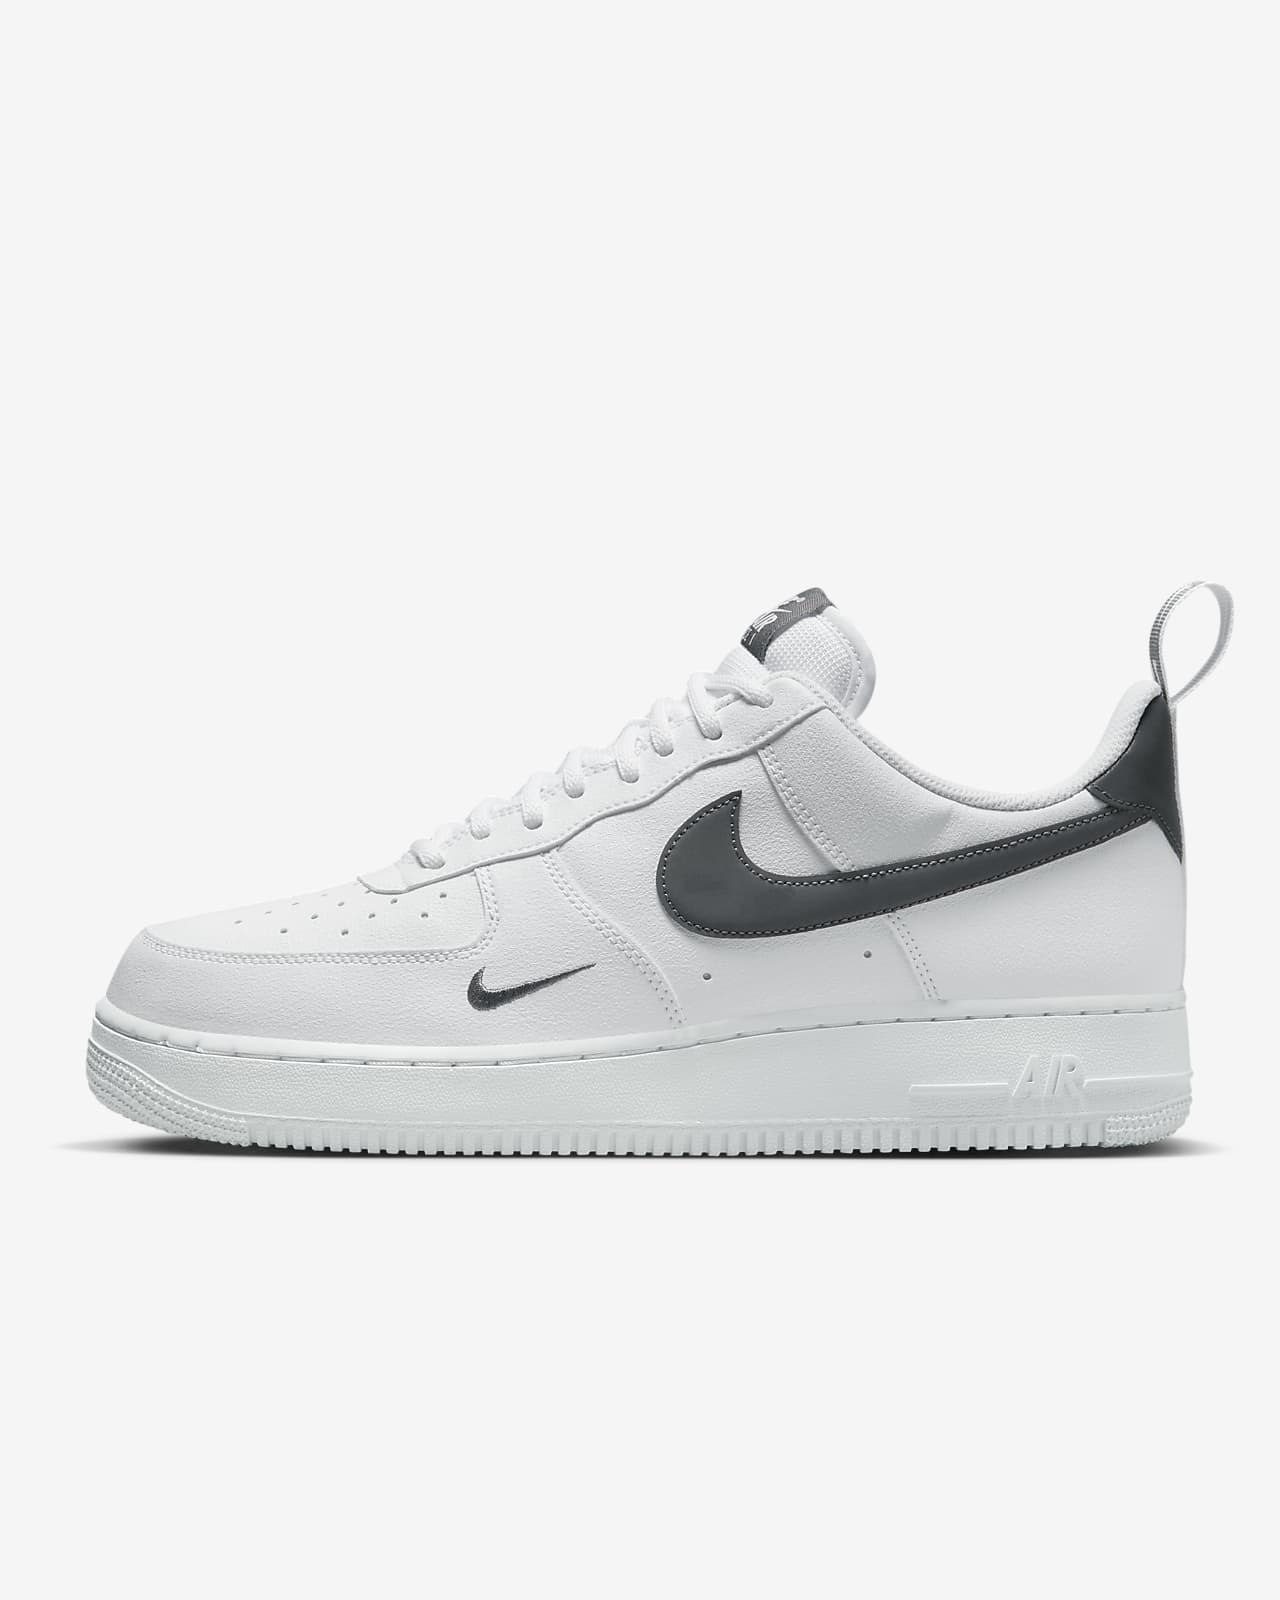 Chaussure Nike Air Force 1 '07 LV8 UT pour Homme